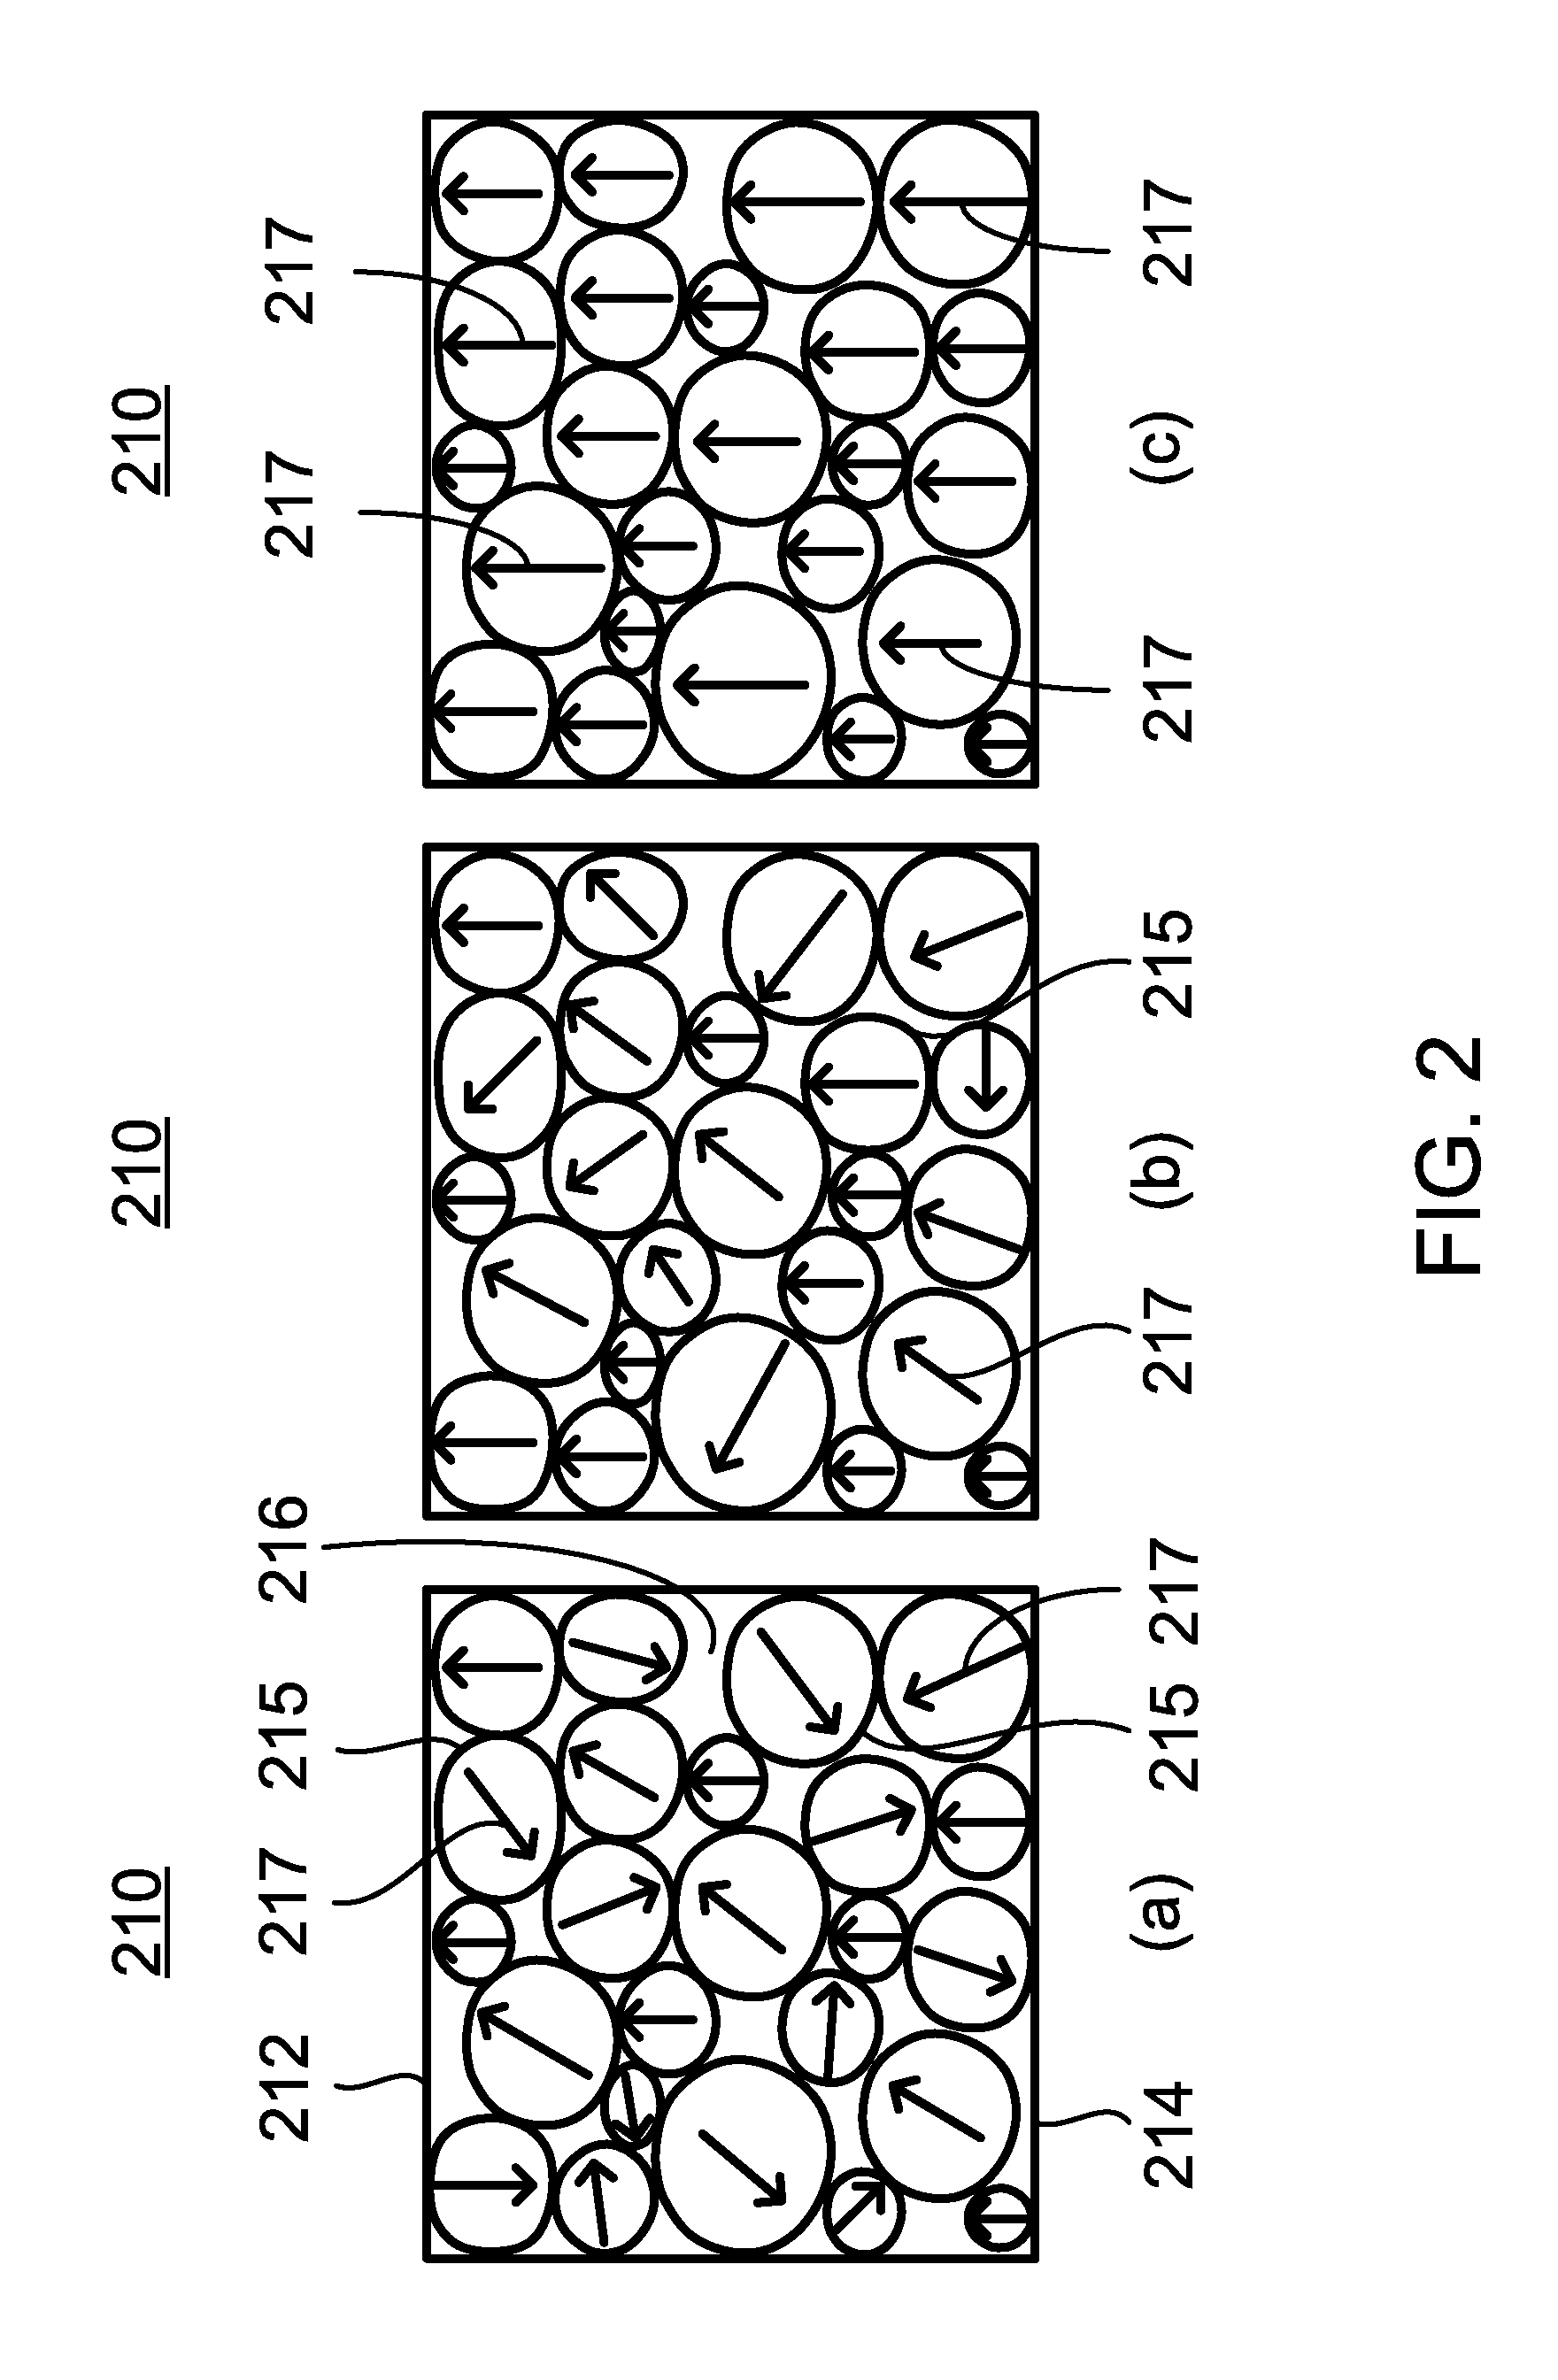 Method and apparatus for conversion of heat to electrical energy using polarizable materials and an internally generated poling field